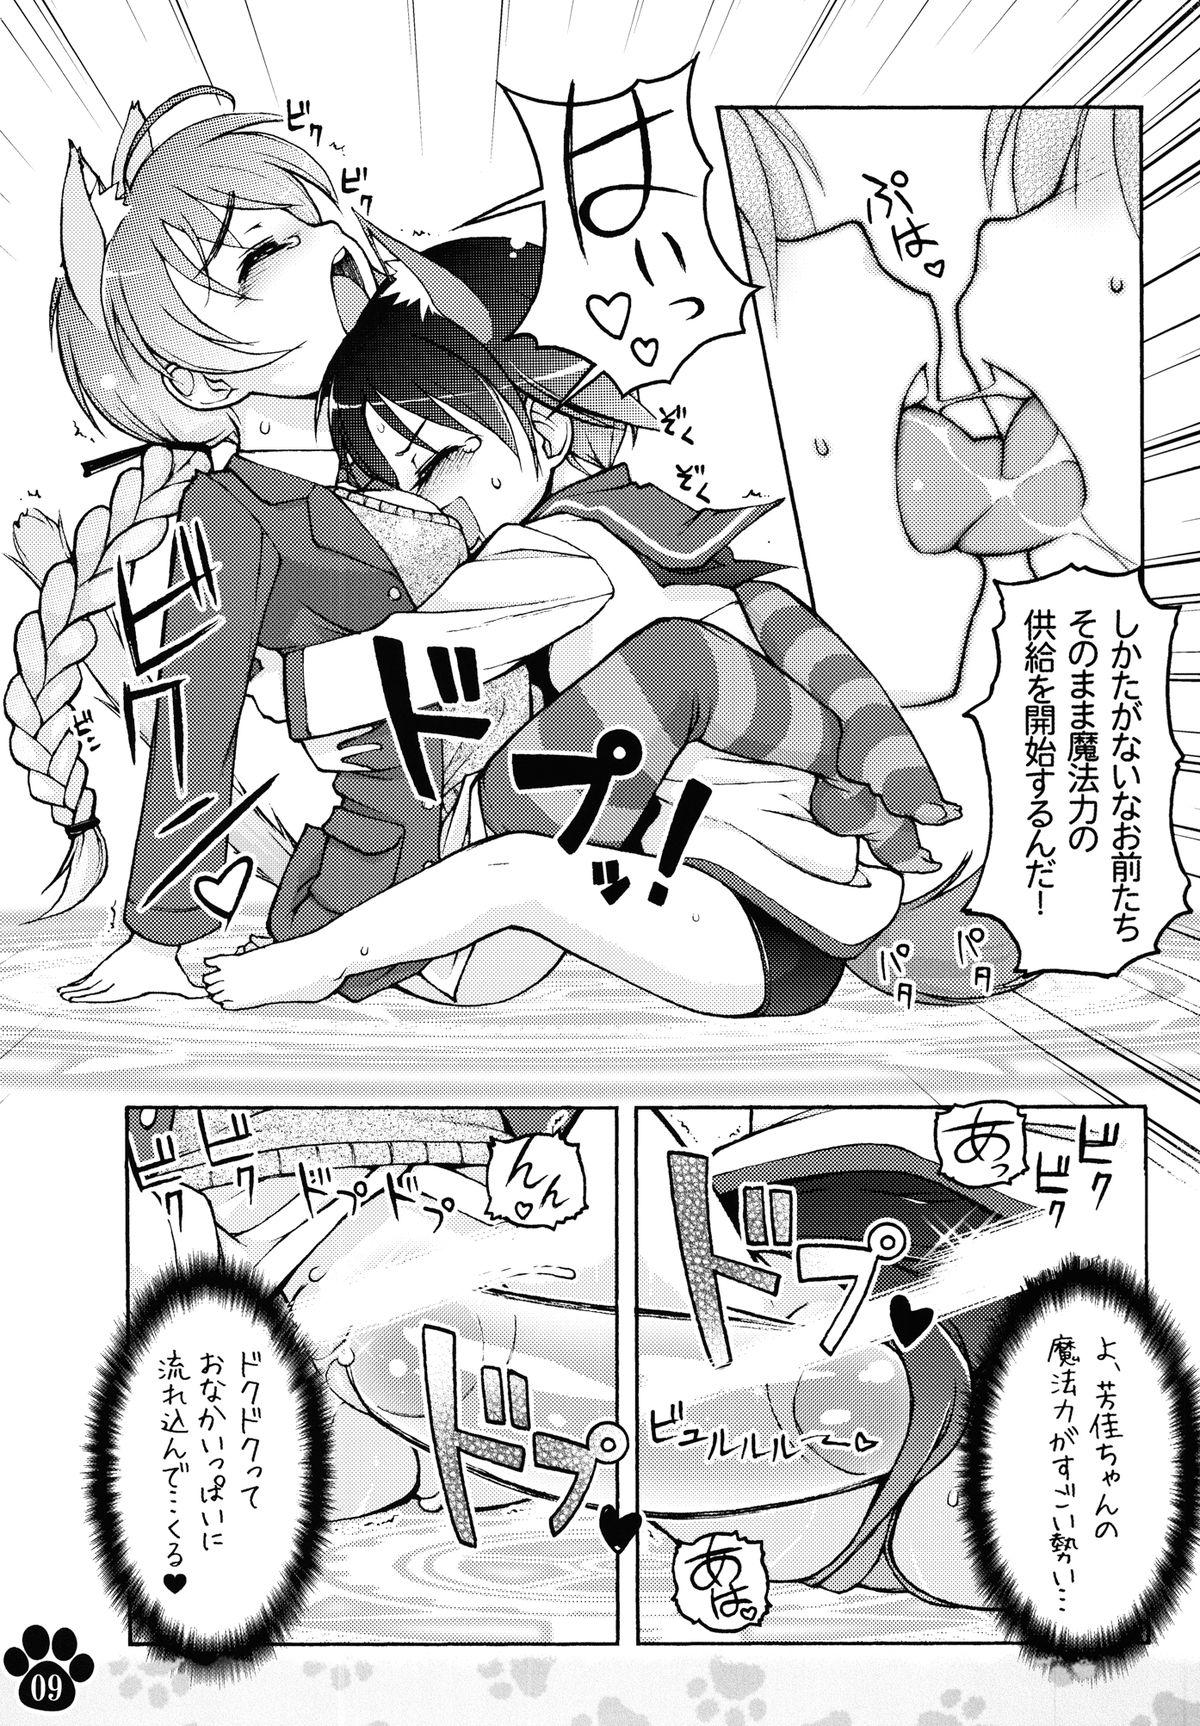 Gayhardcore Maniawase Witches Plus - Strike witches Parody - Page 9